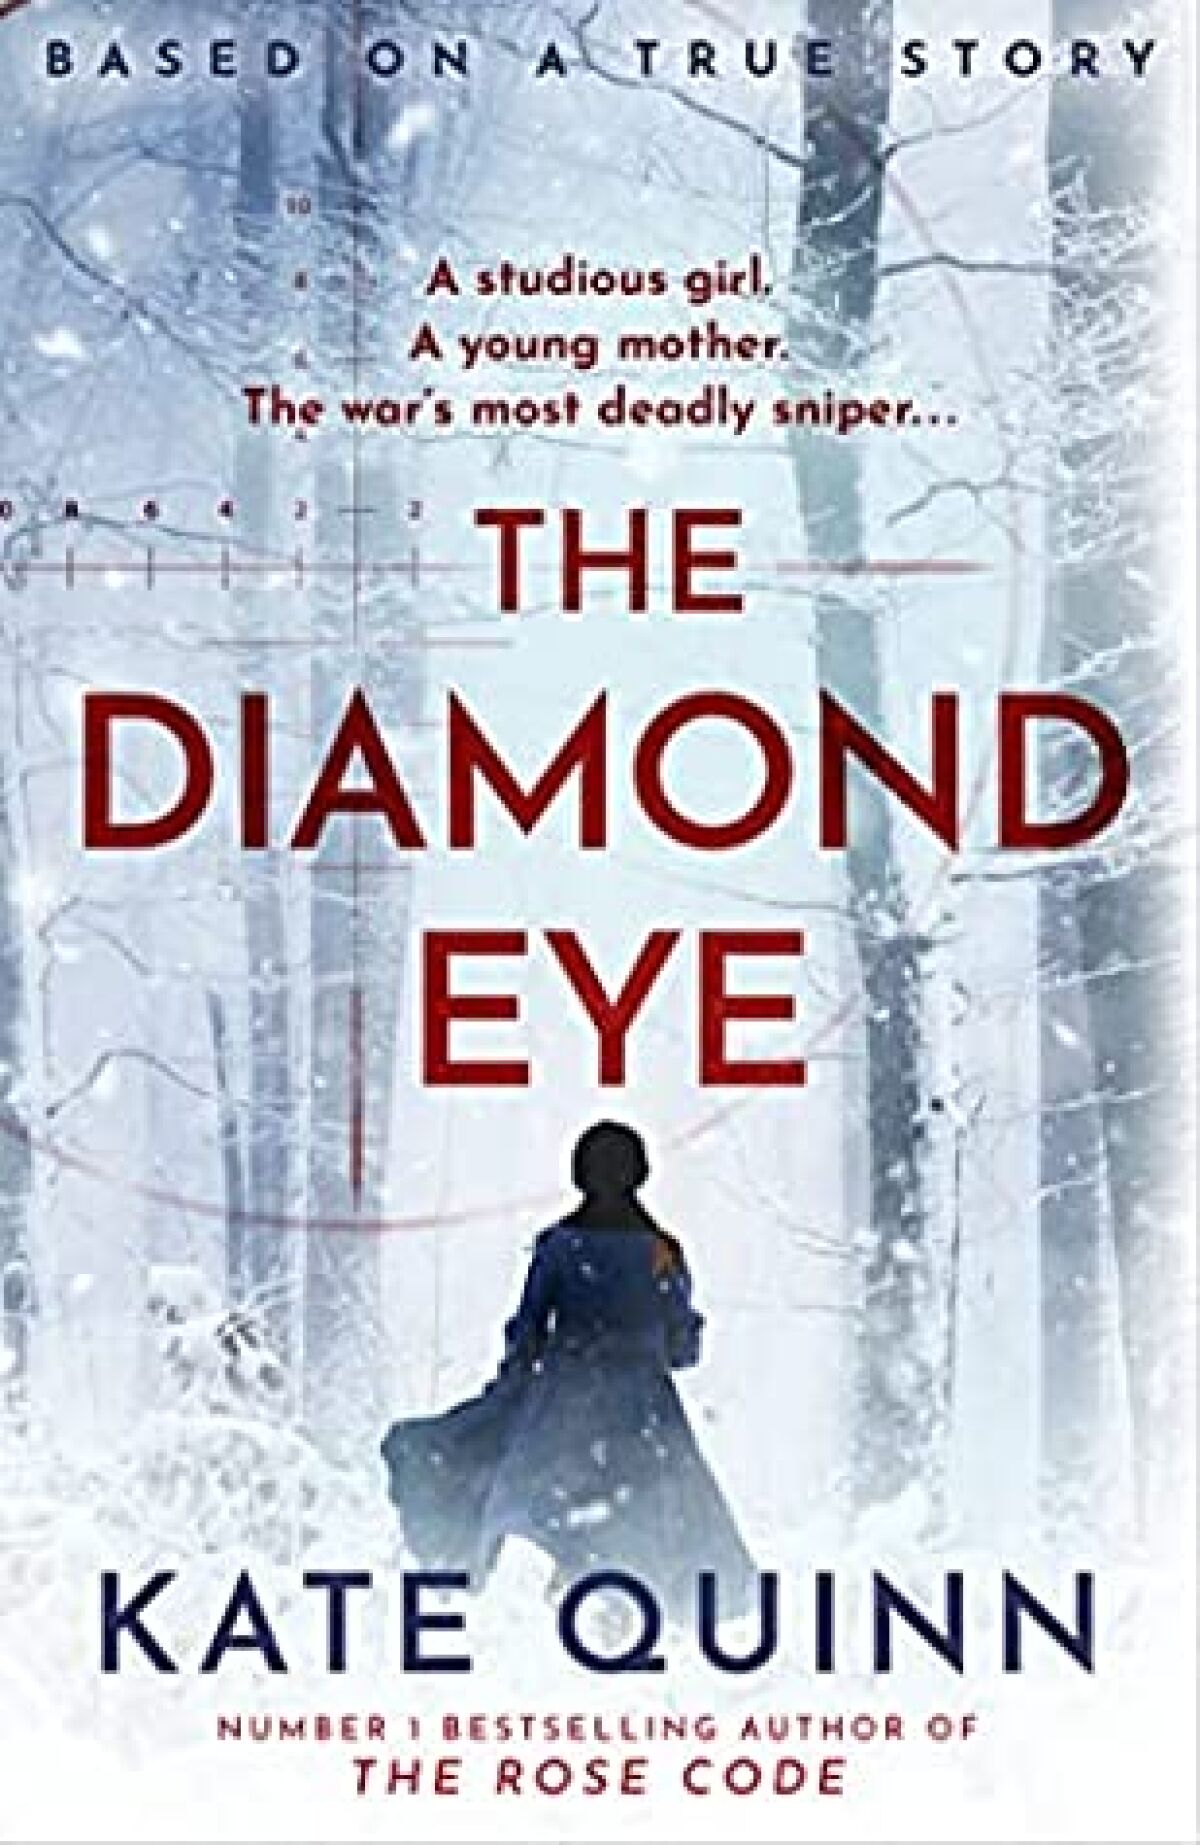 The cover of "The Diamond Eye" by Kate Quinn